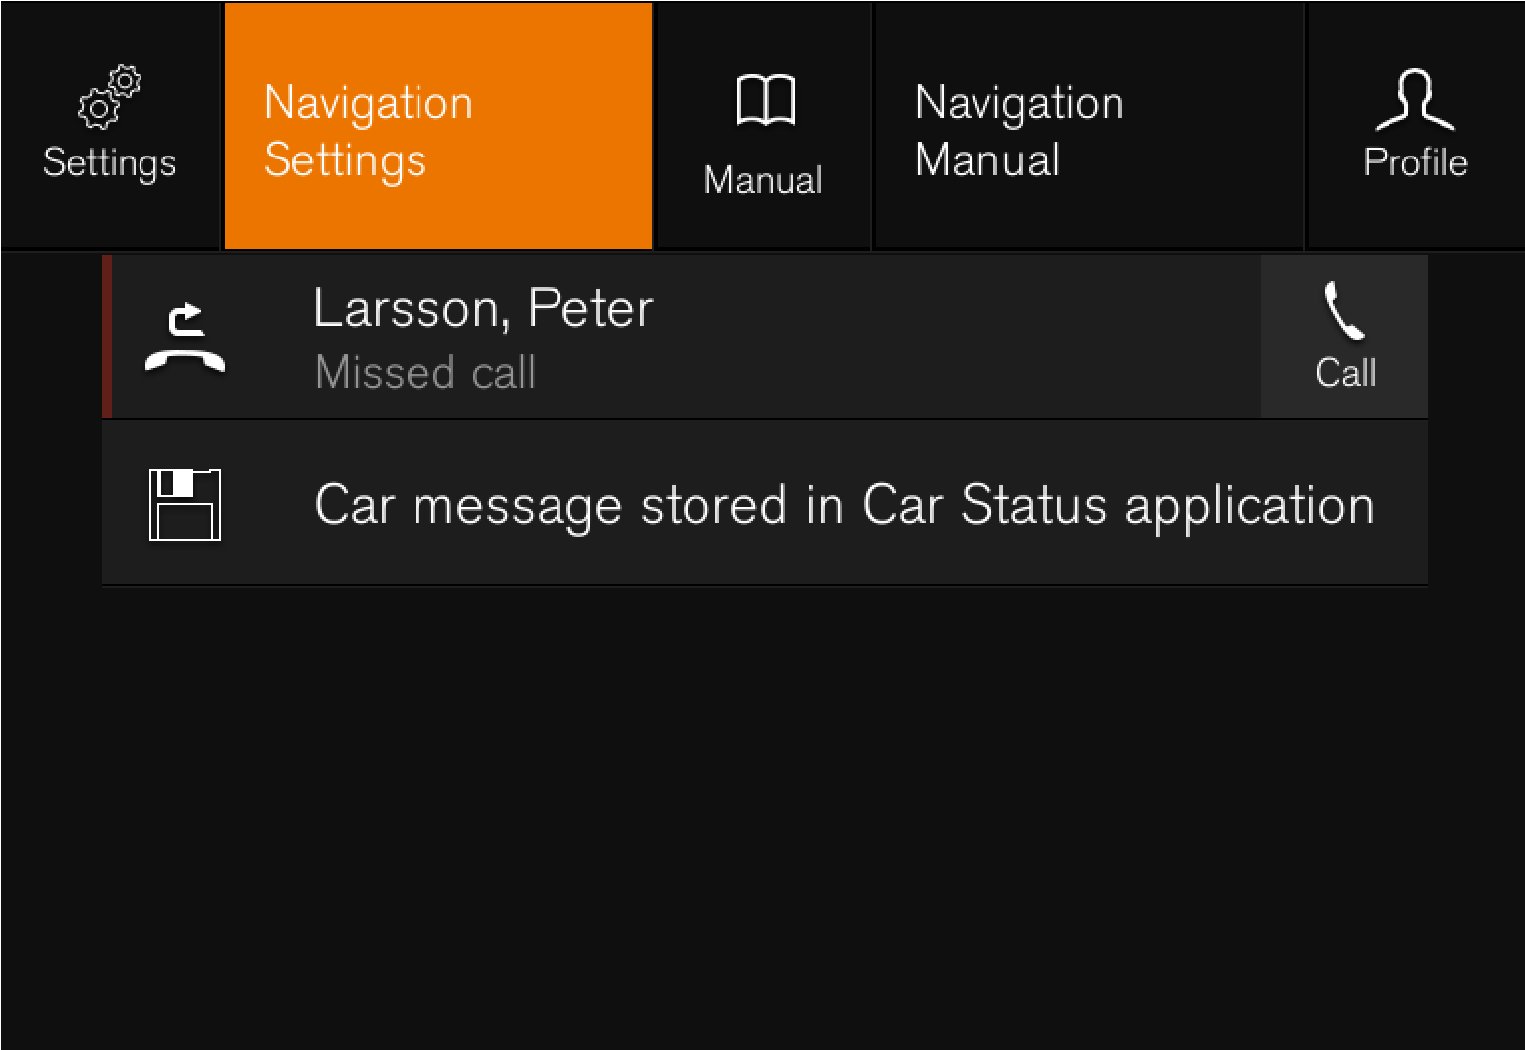 PS-1926-Navigation settings pane-Contextueal higlighted